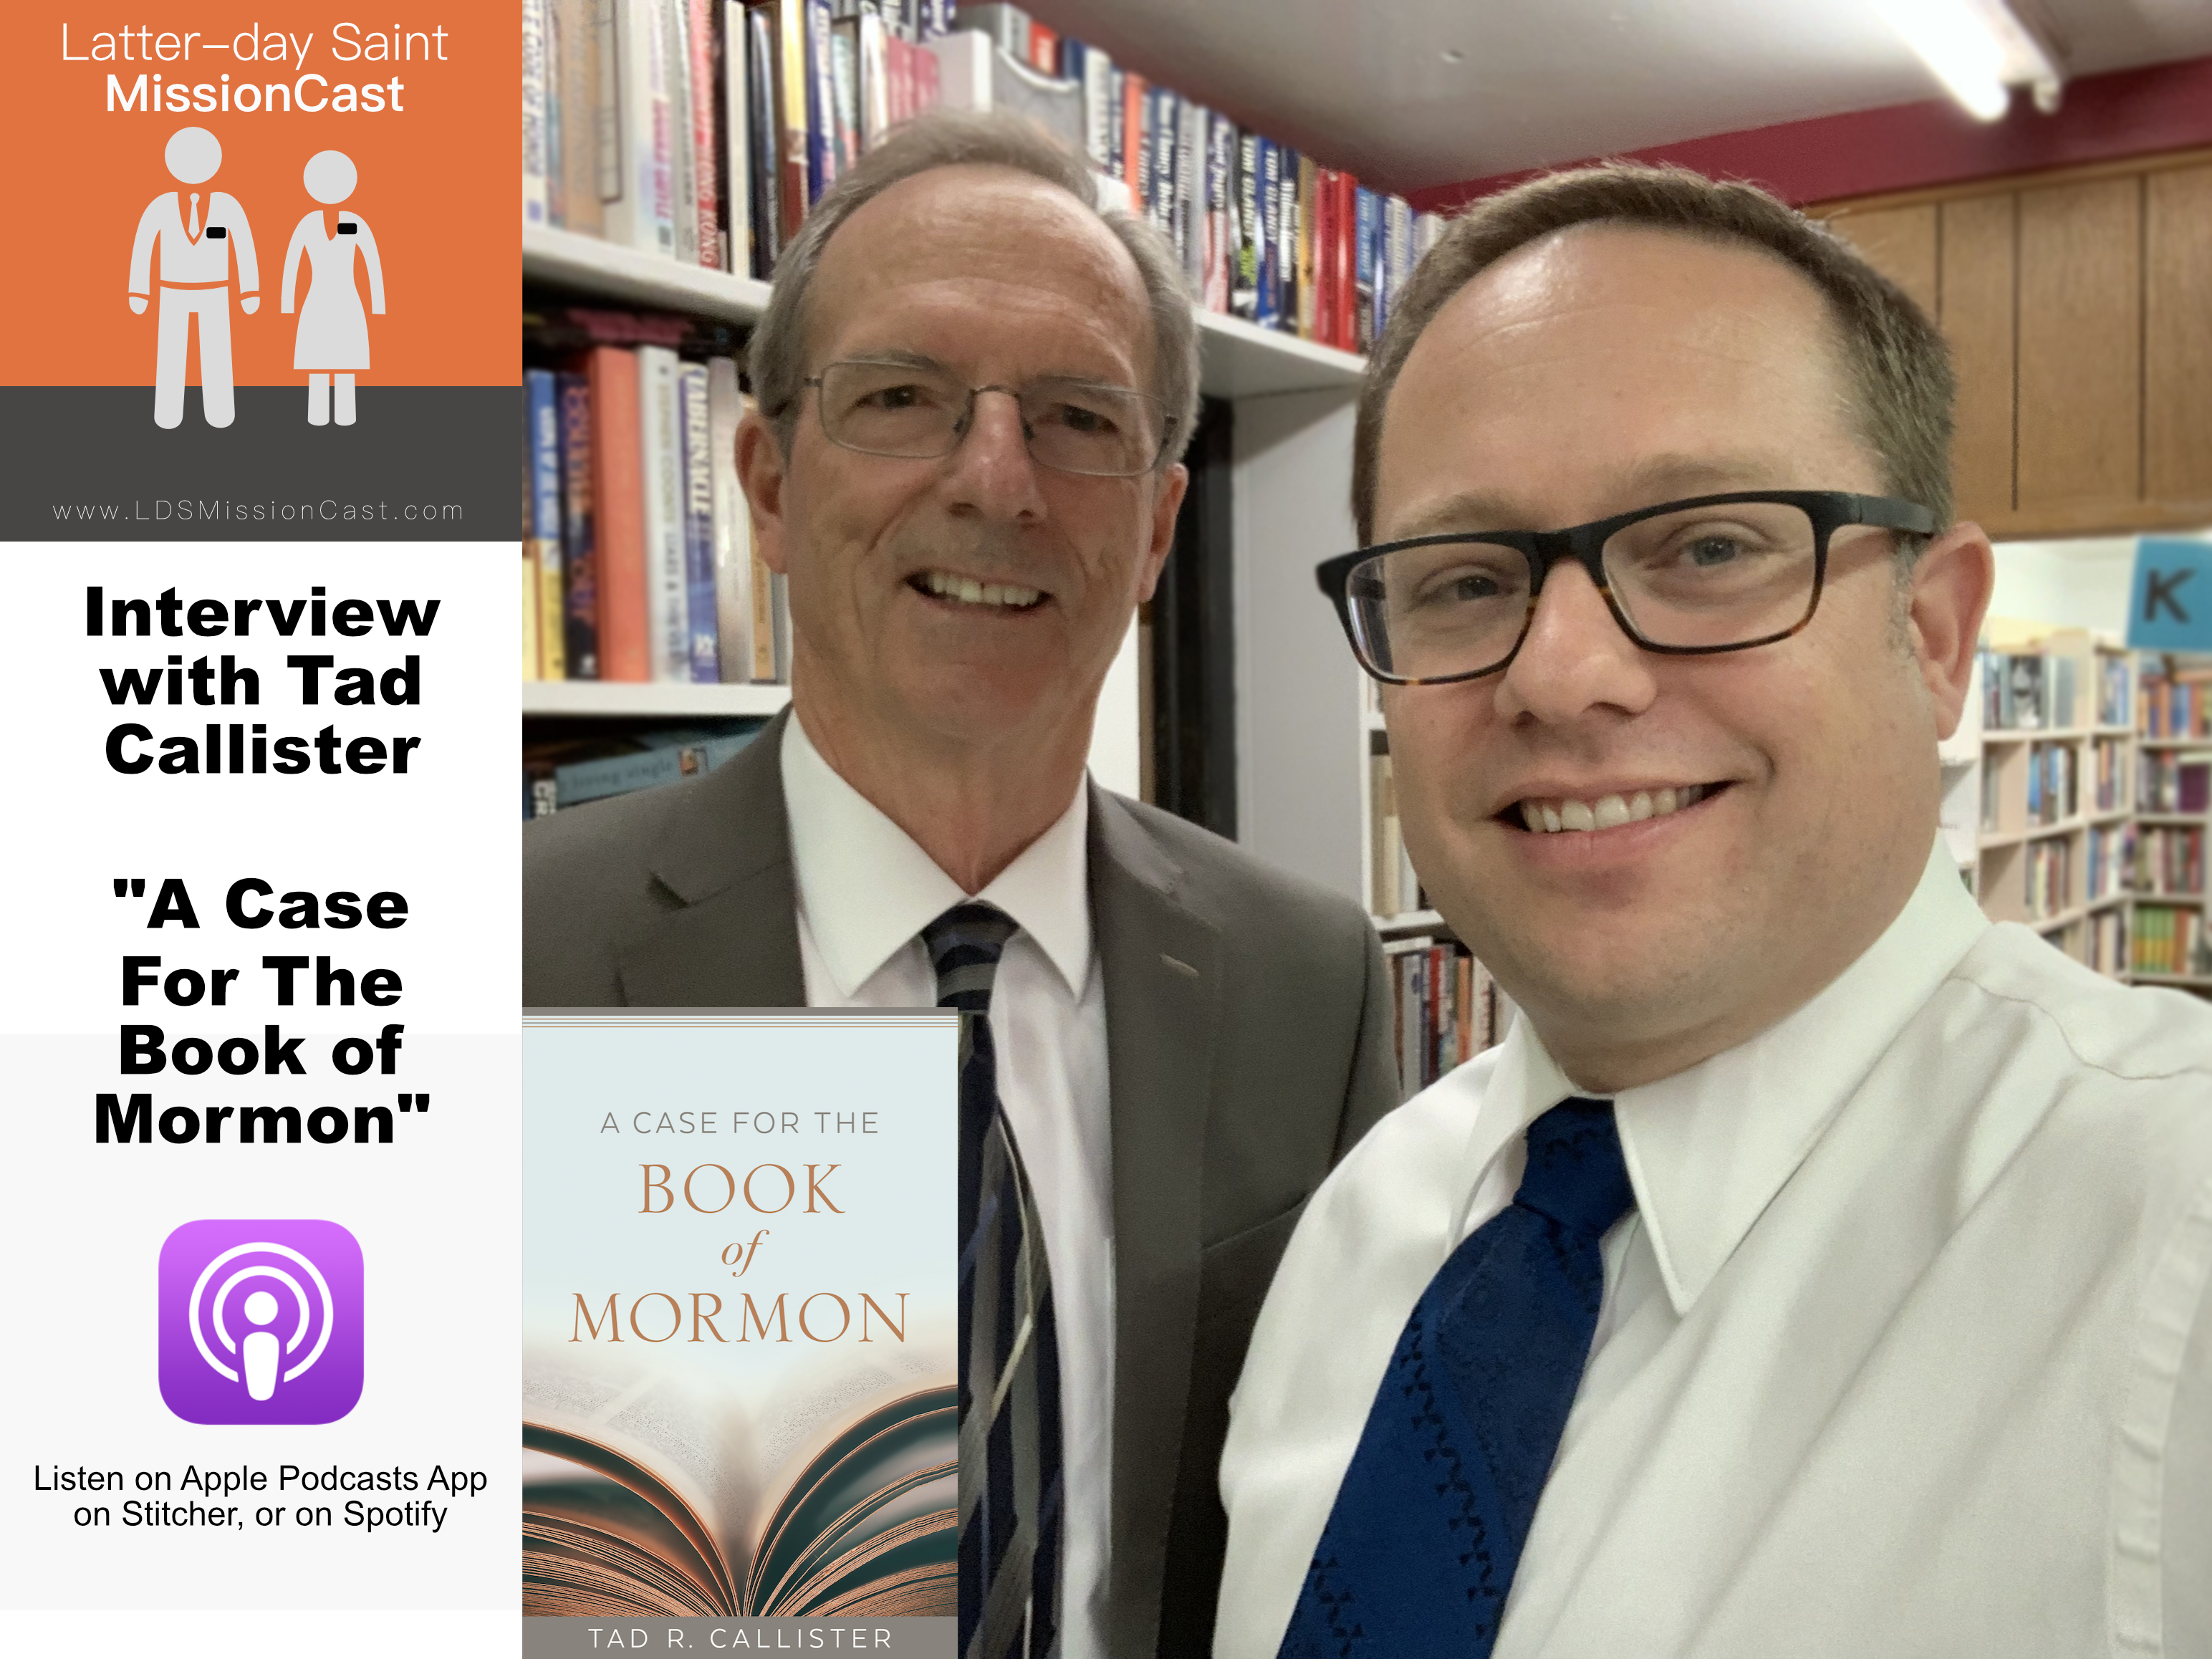 Tad Callister Interview A Case For The Book of Mormon